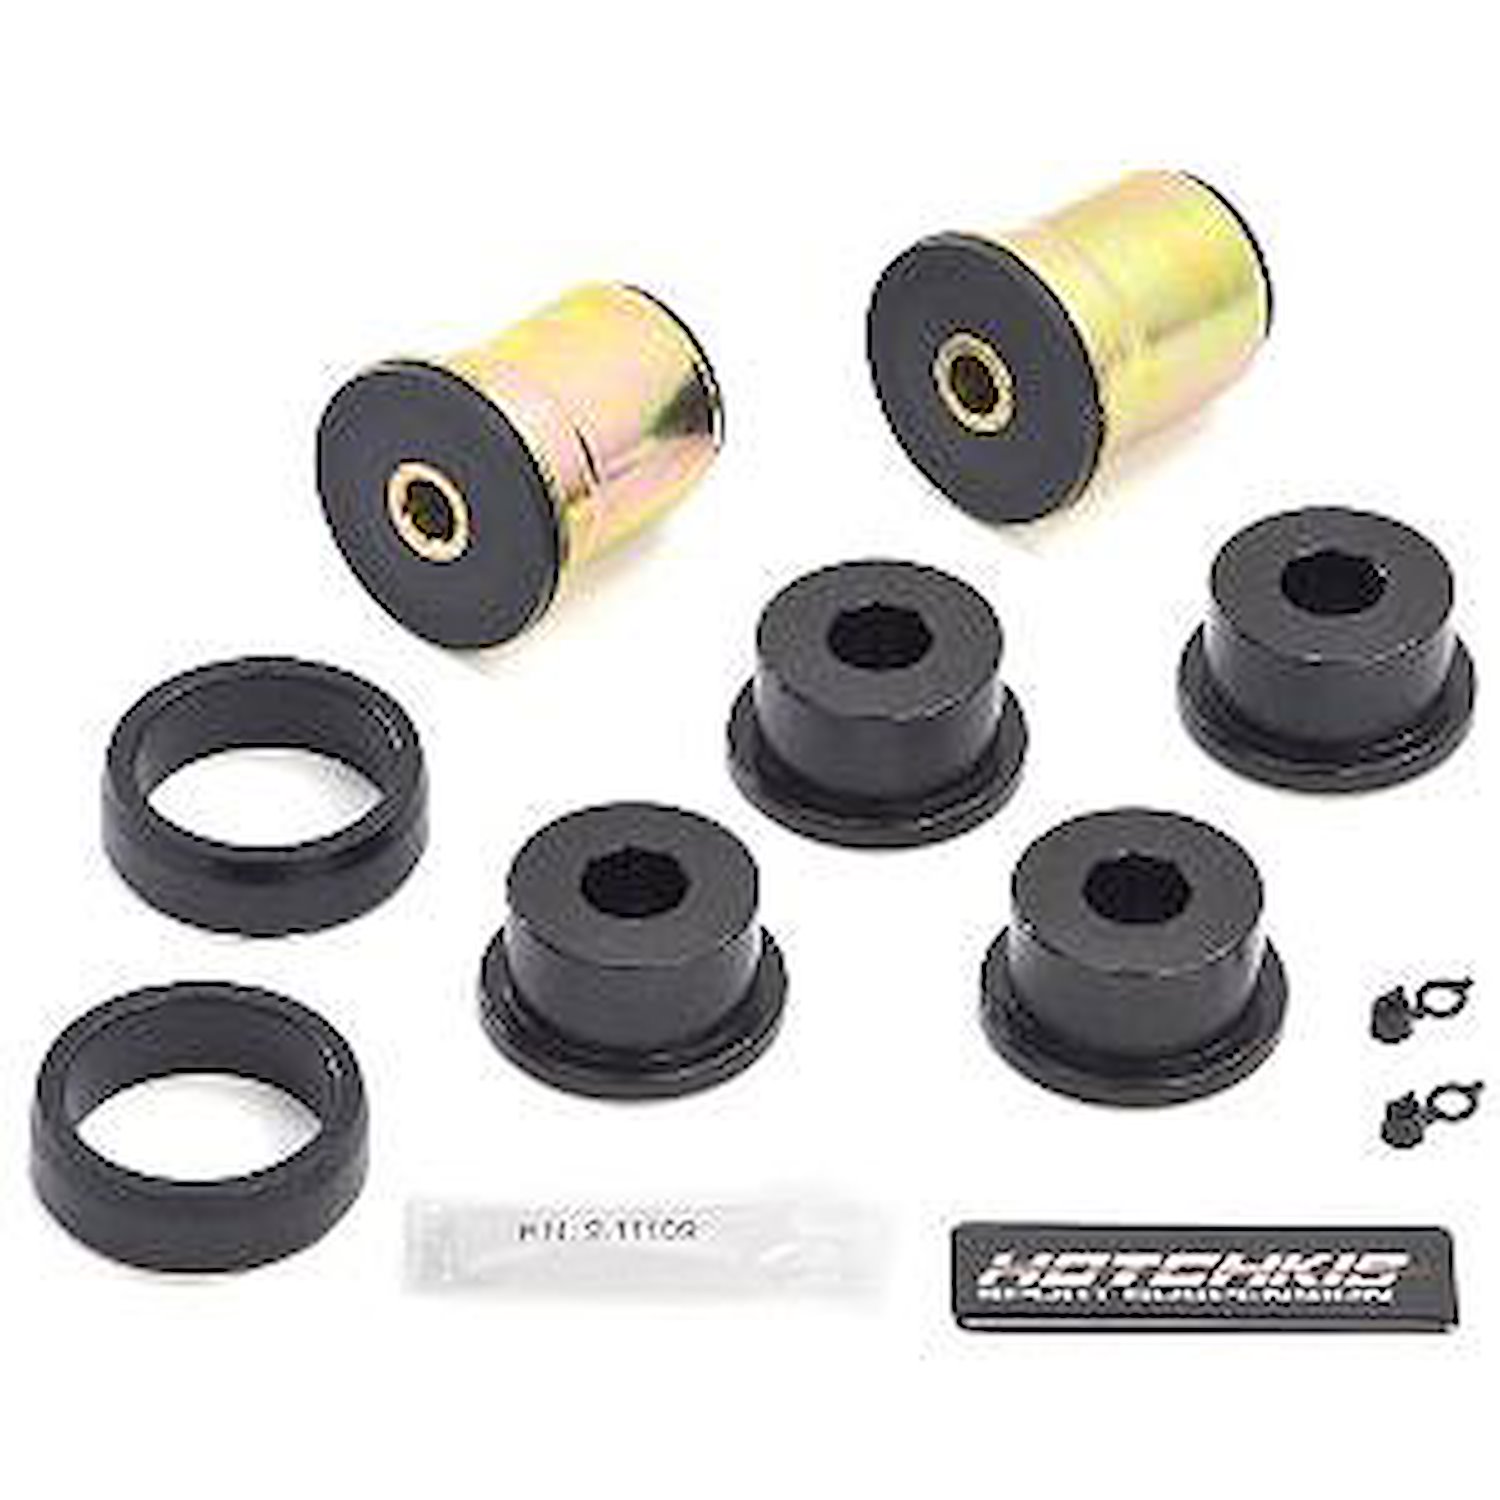 Trailing Arm Bushing Kit For Use With 515-1201AA